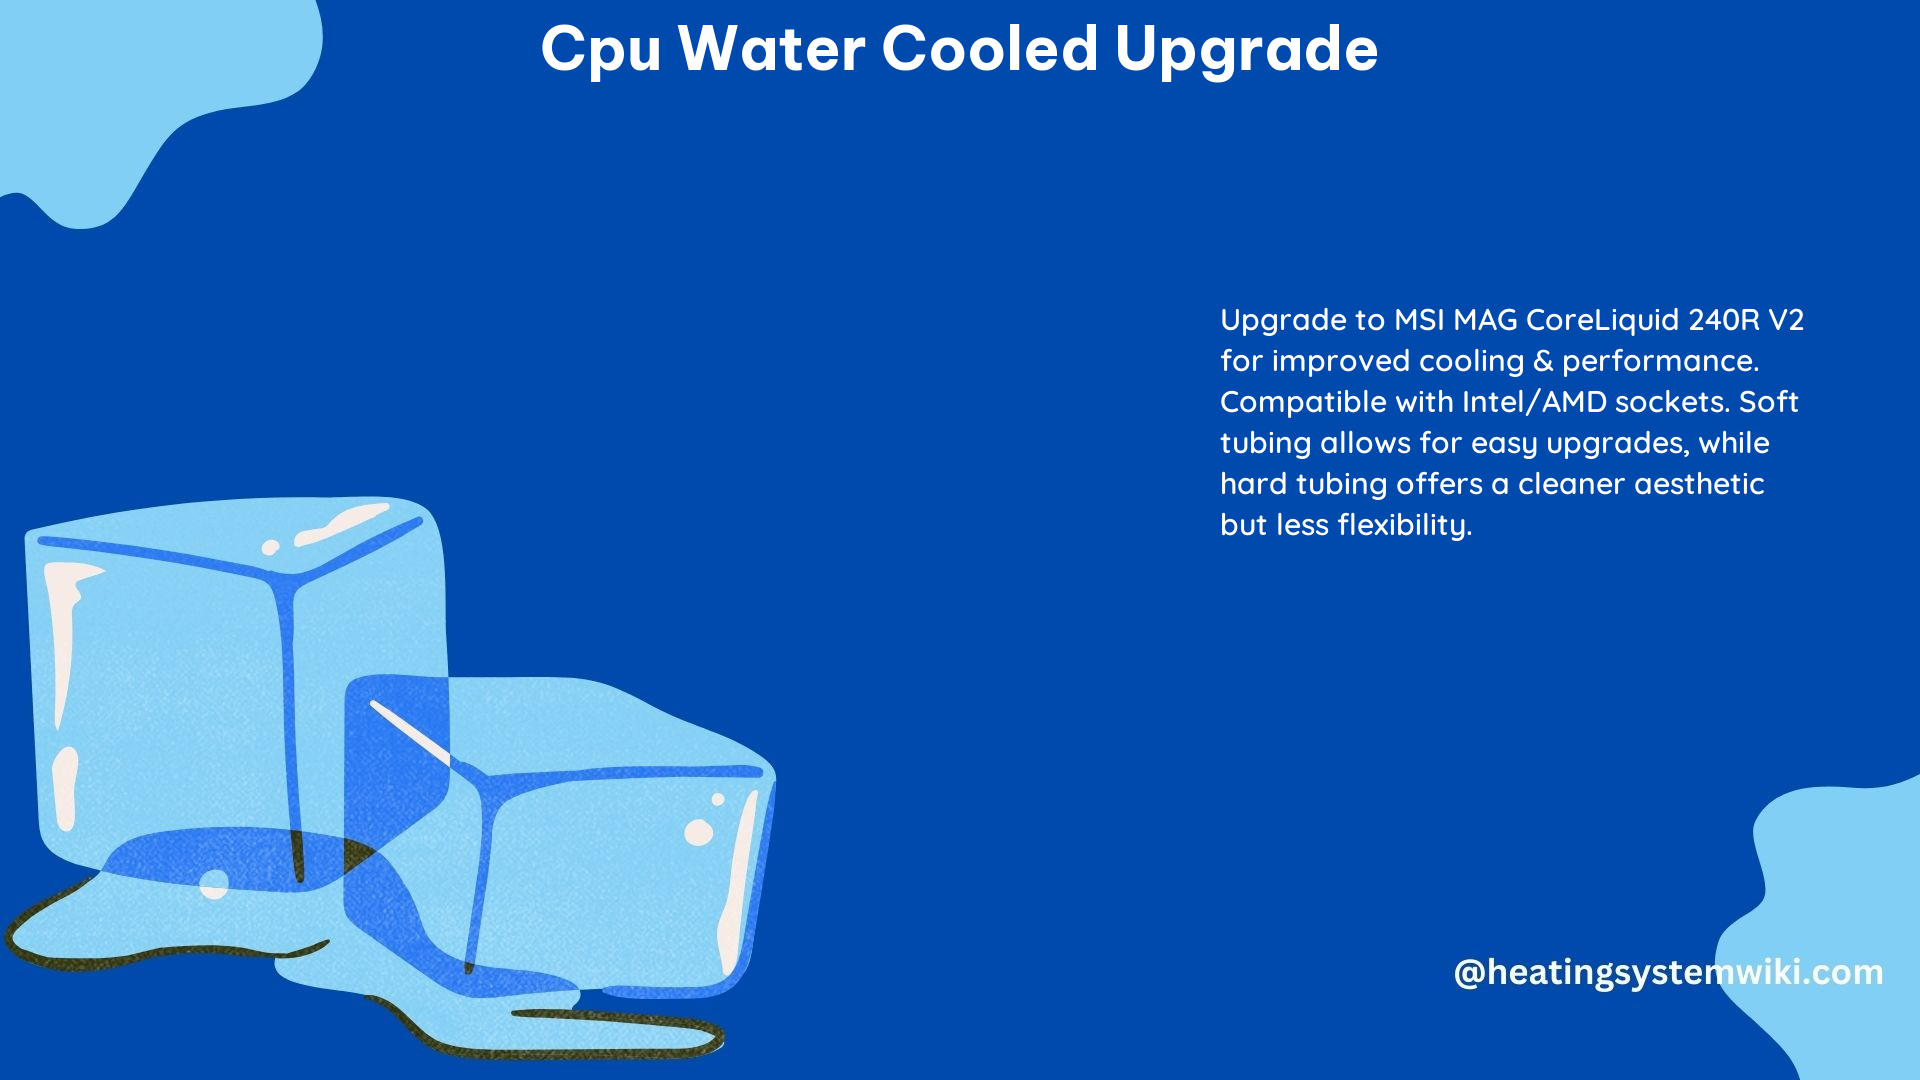 CPU Water Cooled Upgrade